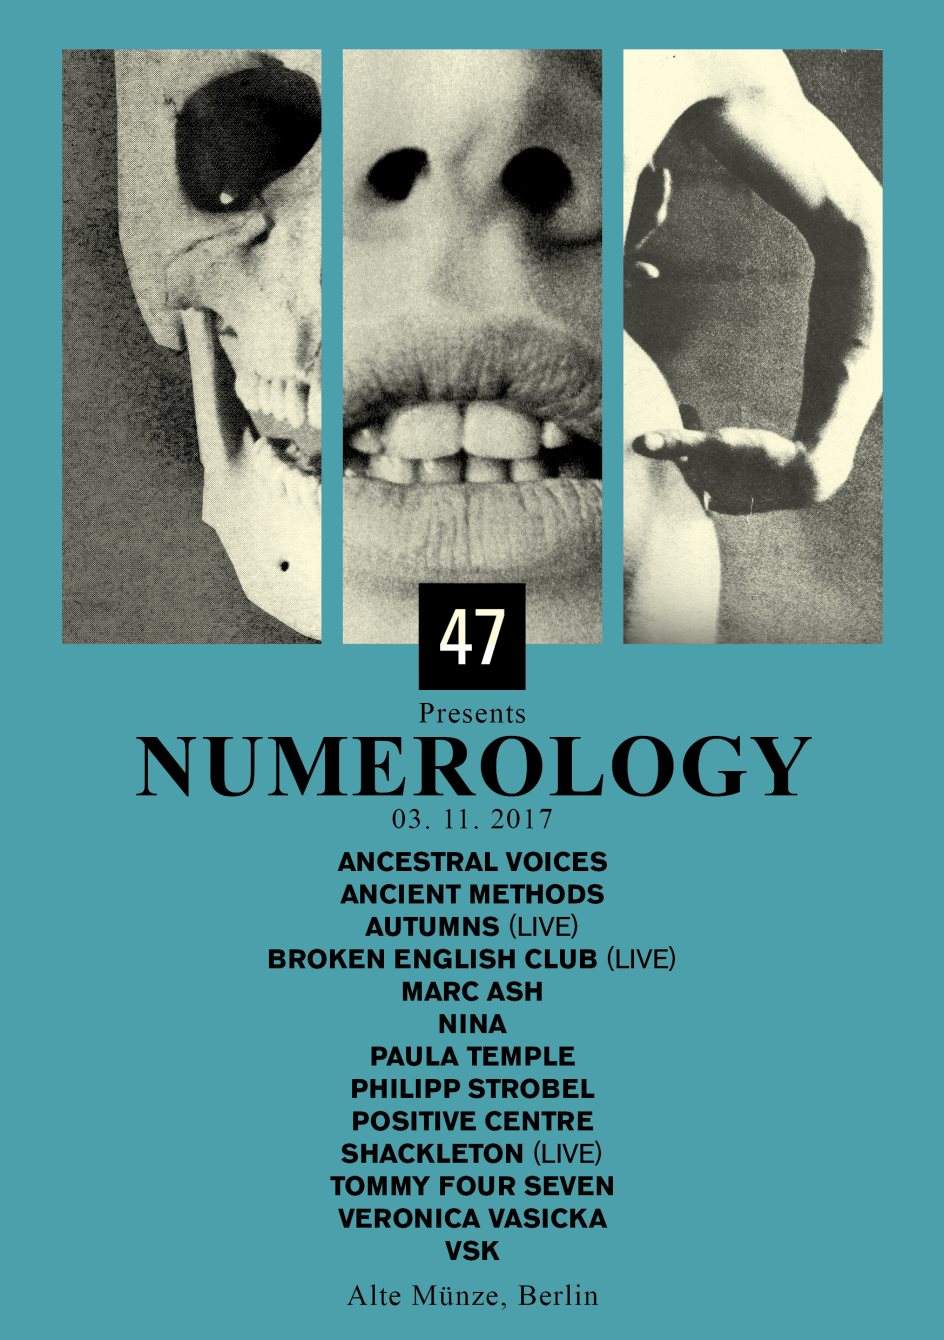 47 presents Numerology: Ancient Methods, Paula Temple, Shackleton, Tommy Four Seven & More - フライヤー裏